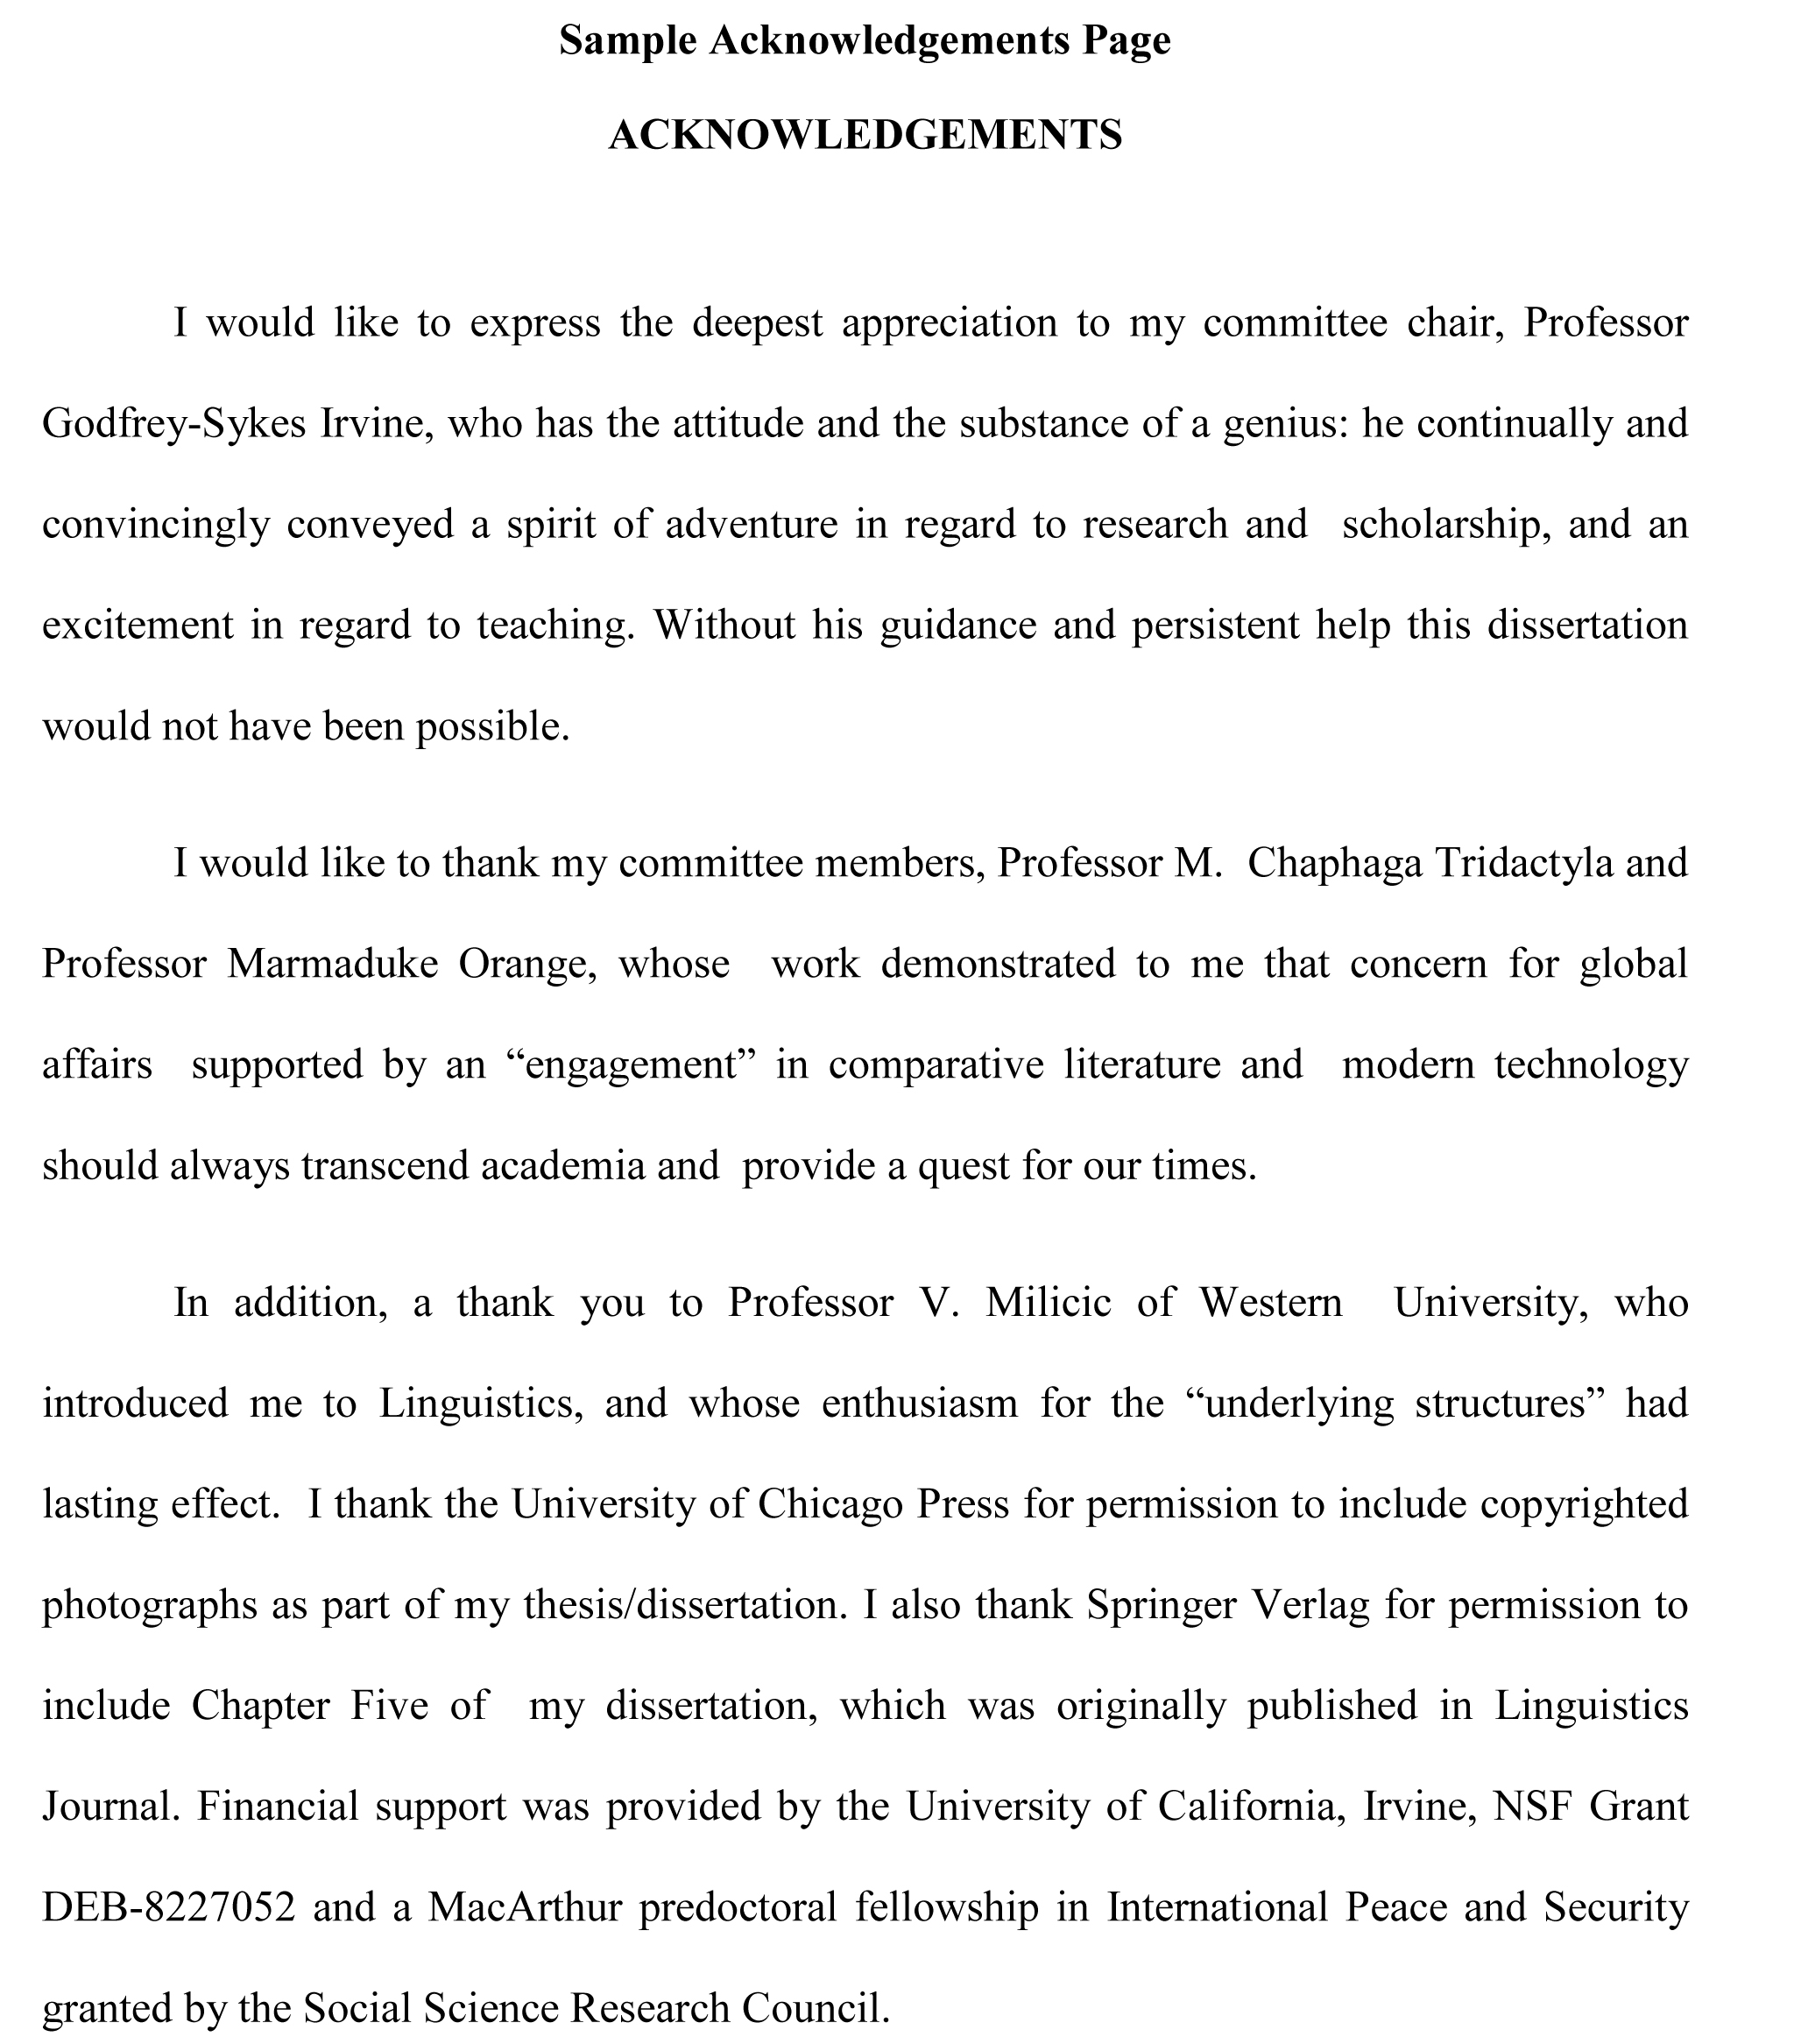 Help with writing a dissertation acknowledgements